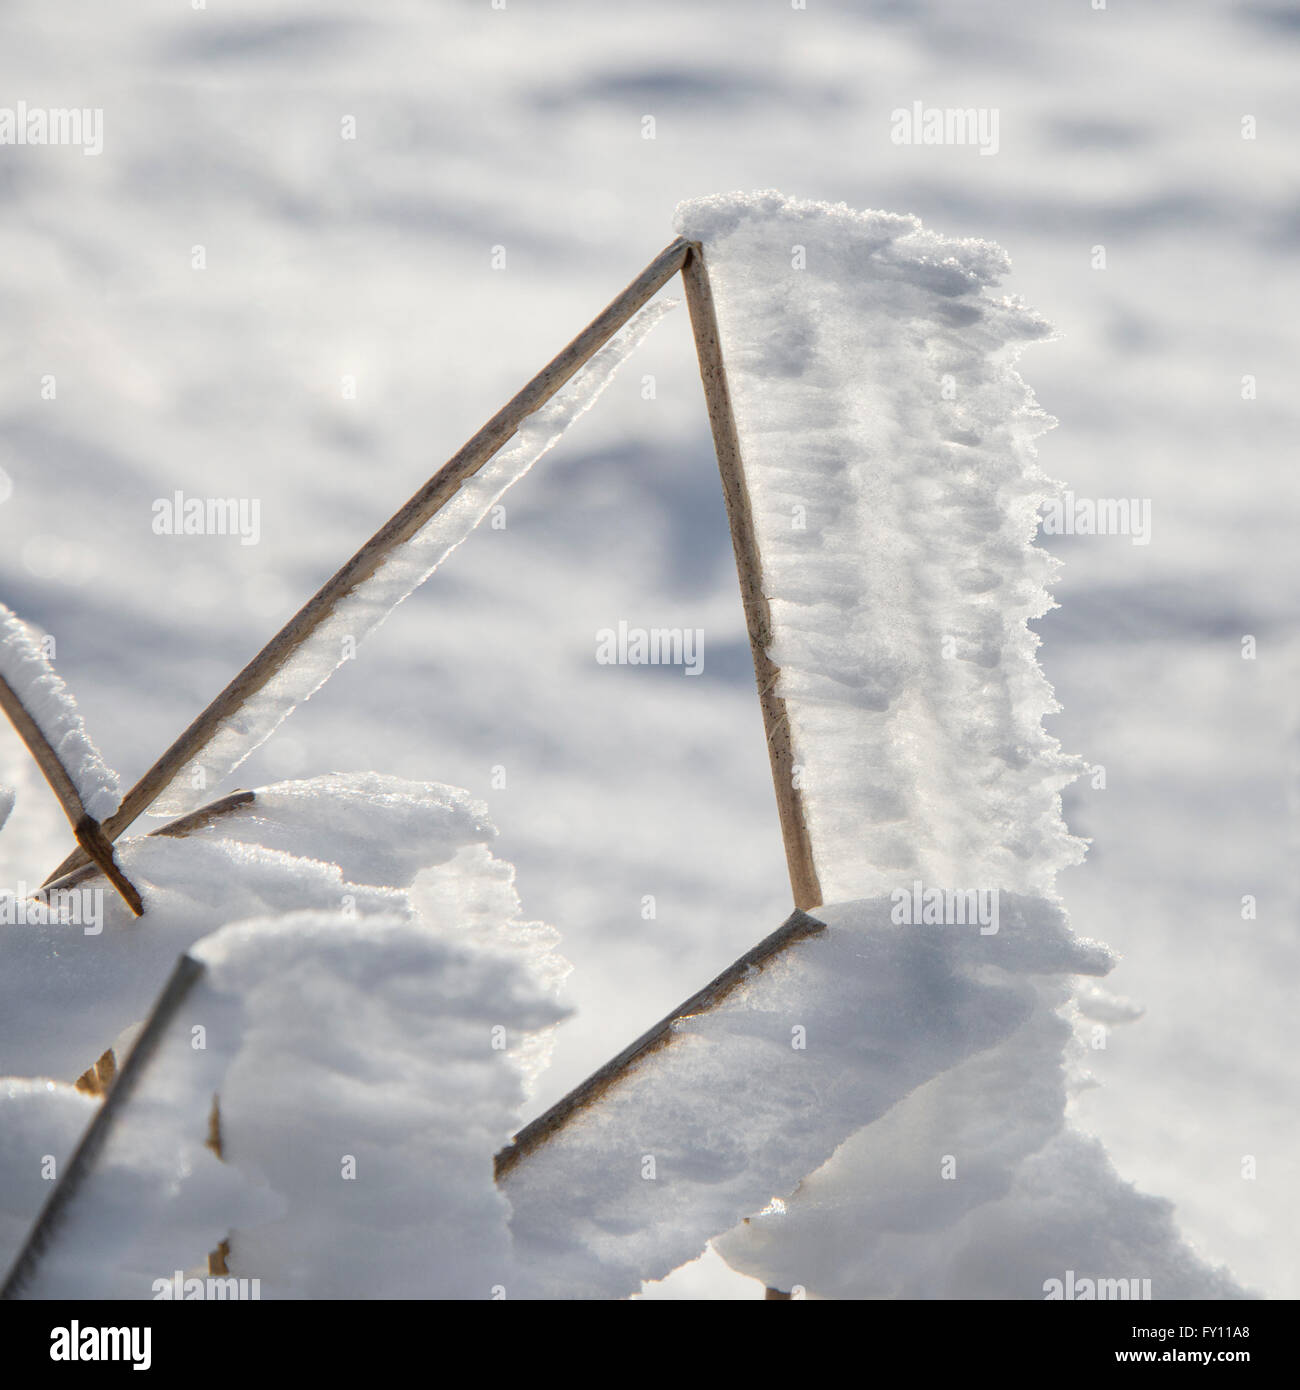 White hoar frost / hoarfrost forming on broken grass stem pointing in same direction due to the wind in winter Stock Photo